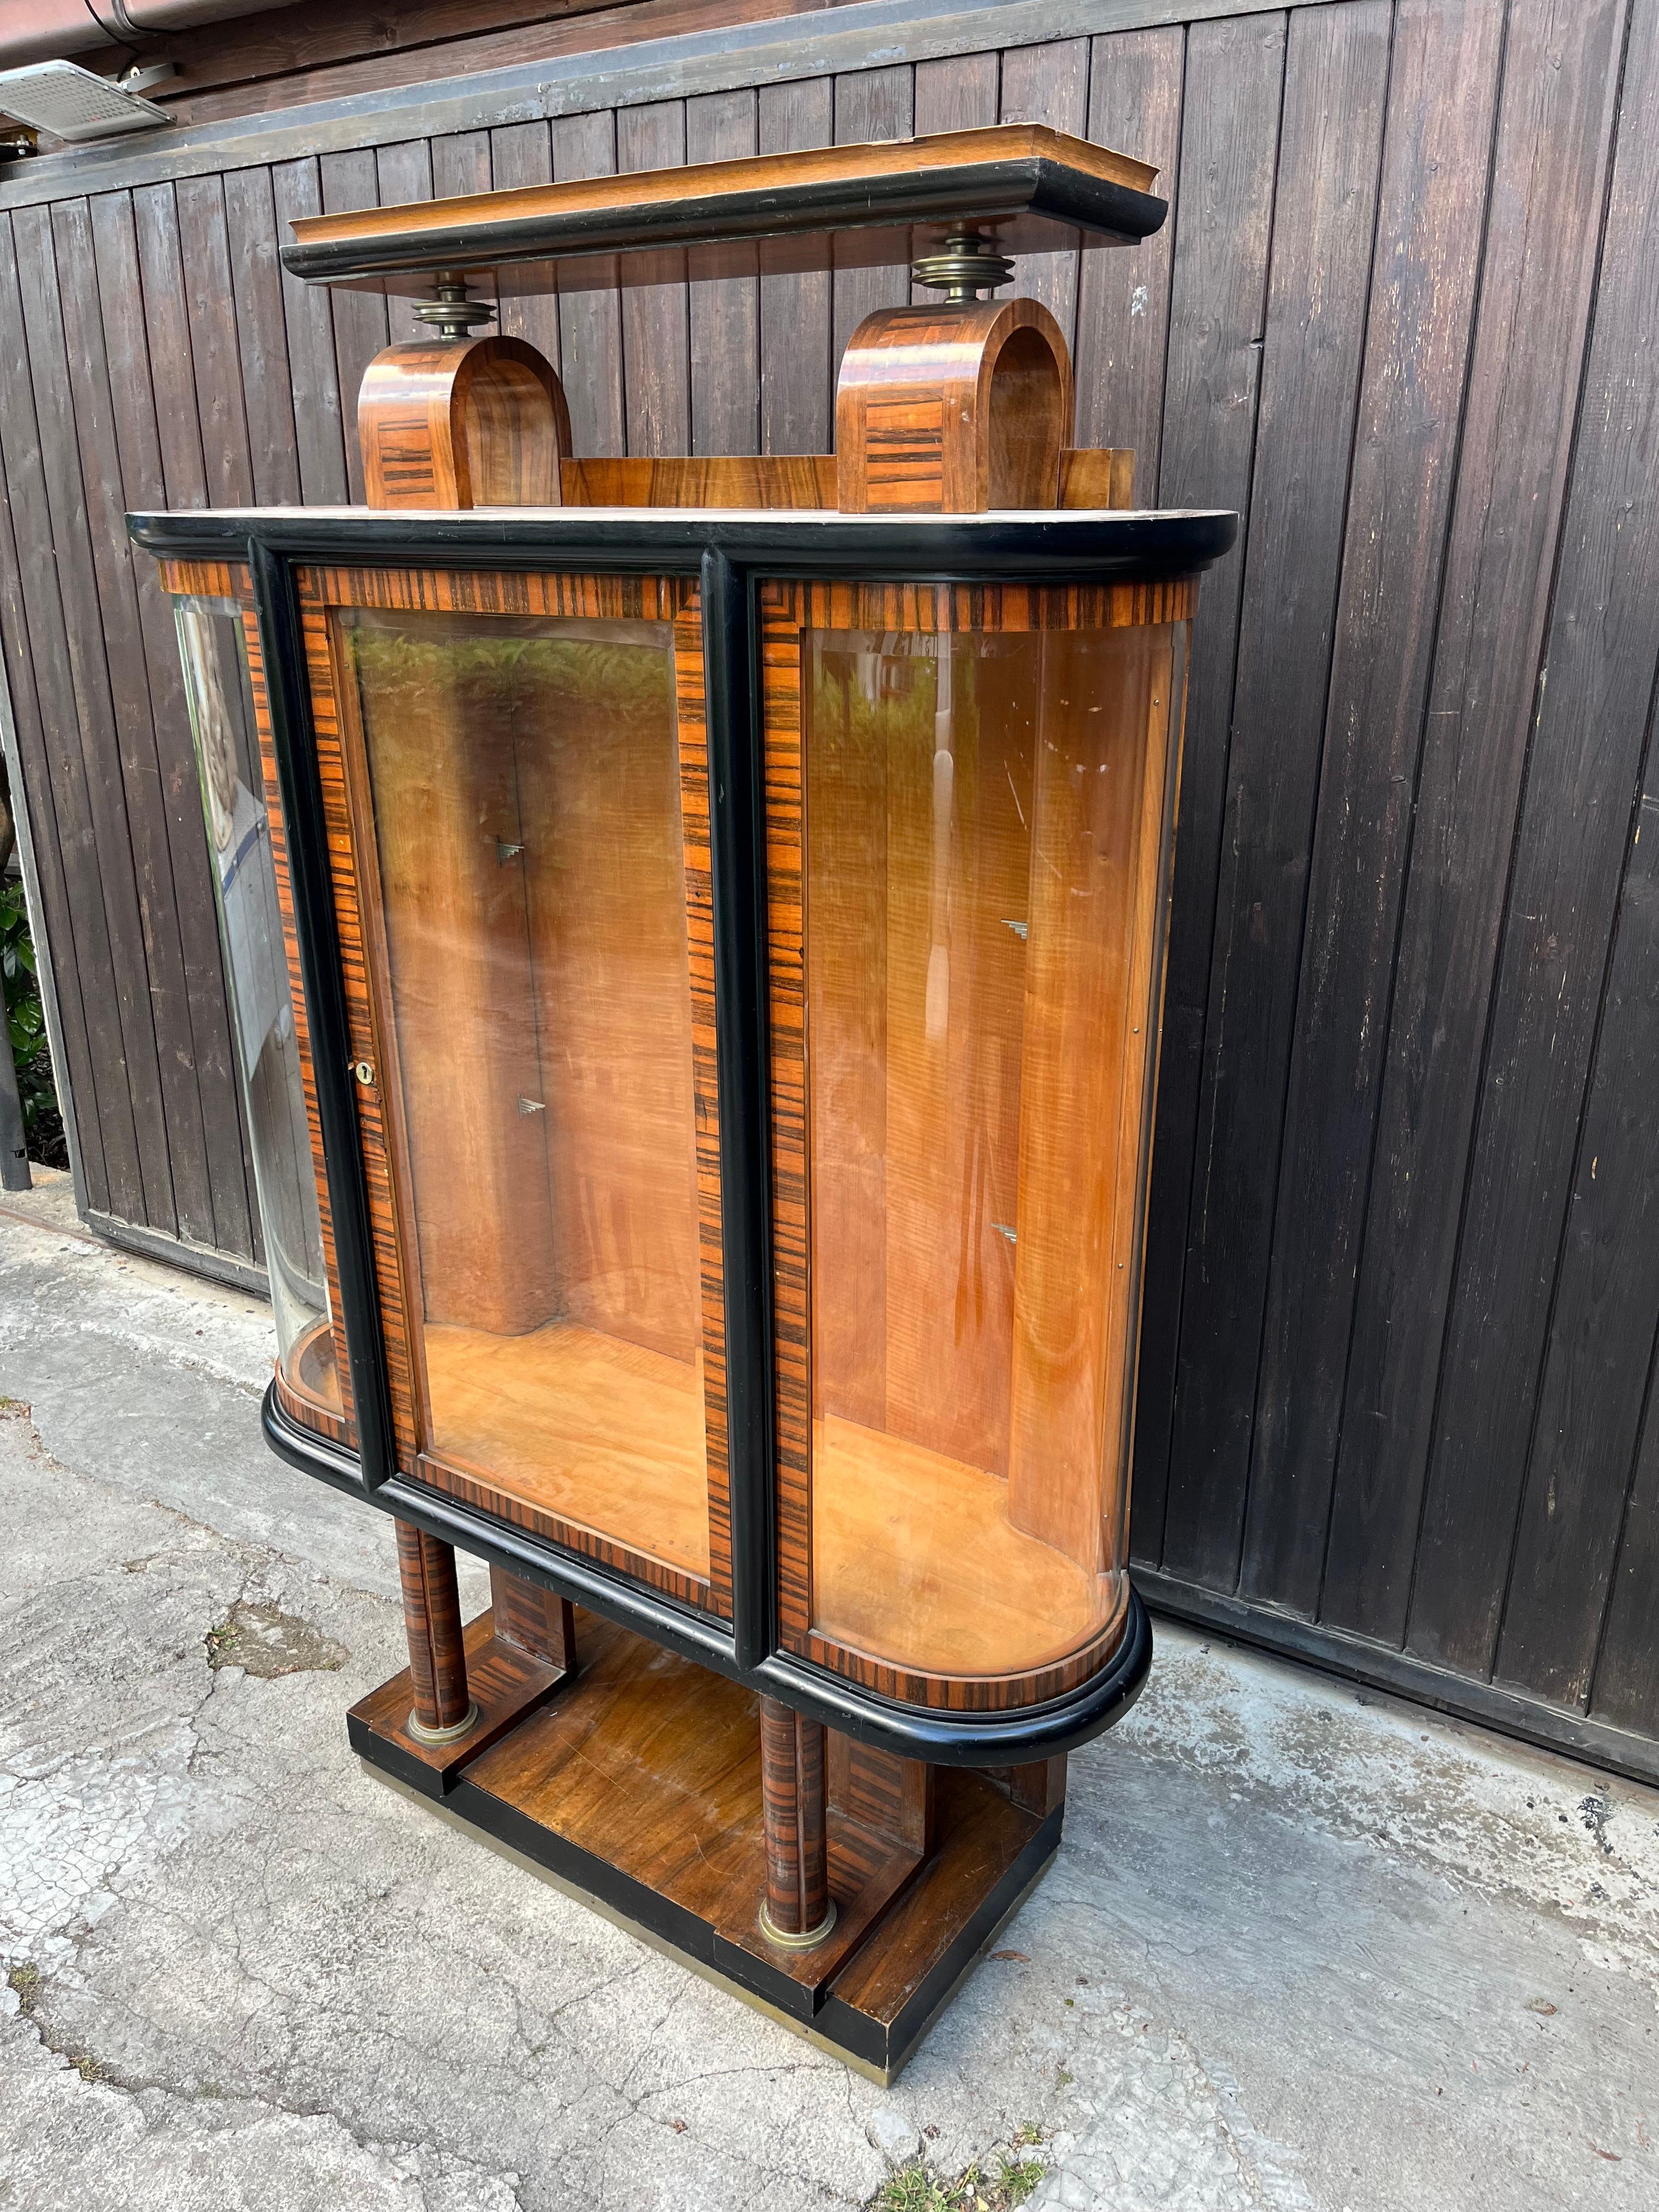 Mid-Century Art Deco italian display cabinet  1930s
Wooden structure and aluminum elements, sides with transparent curved glass. Two glass shelves.
Intact and in good condition, small signs of aging.